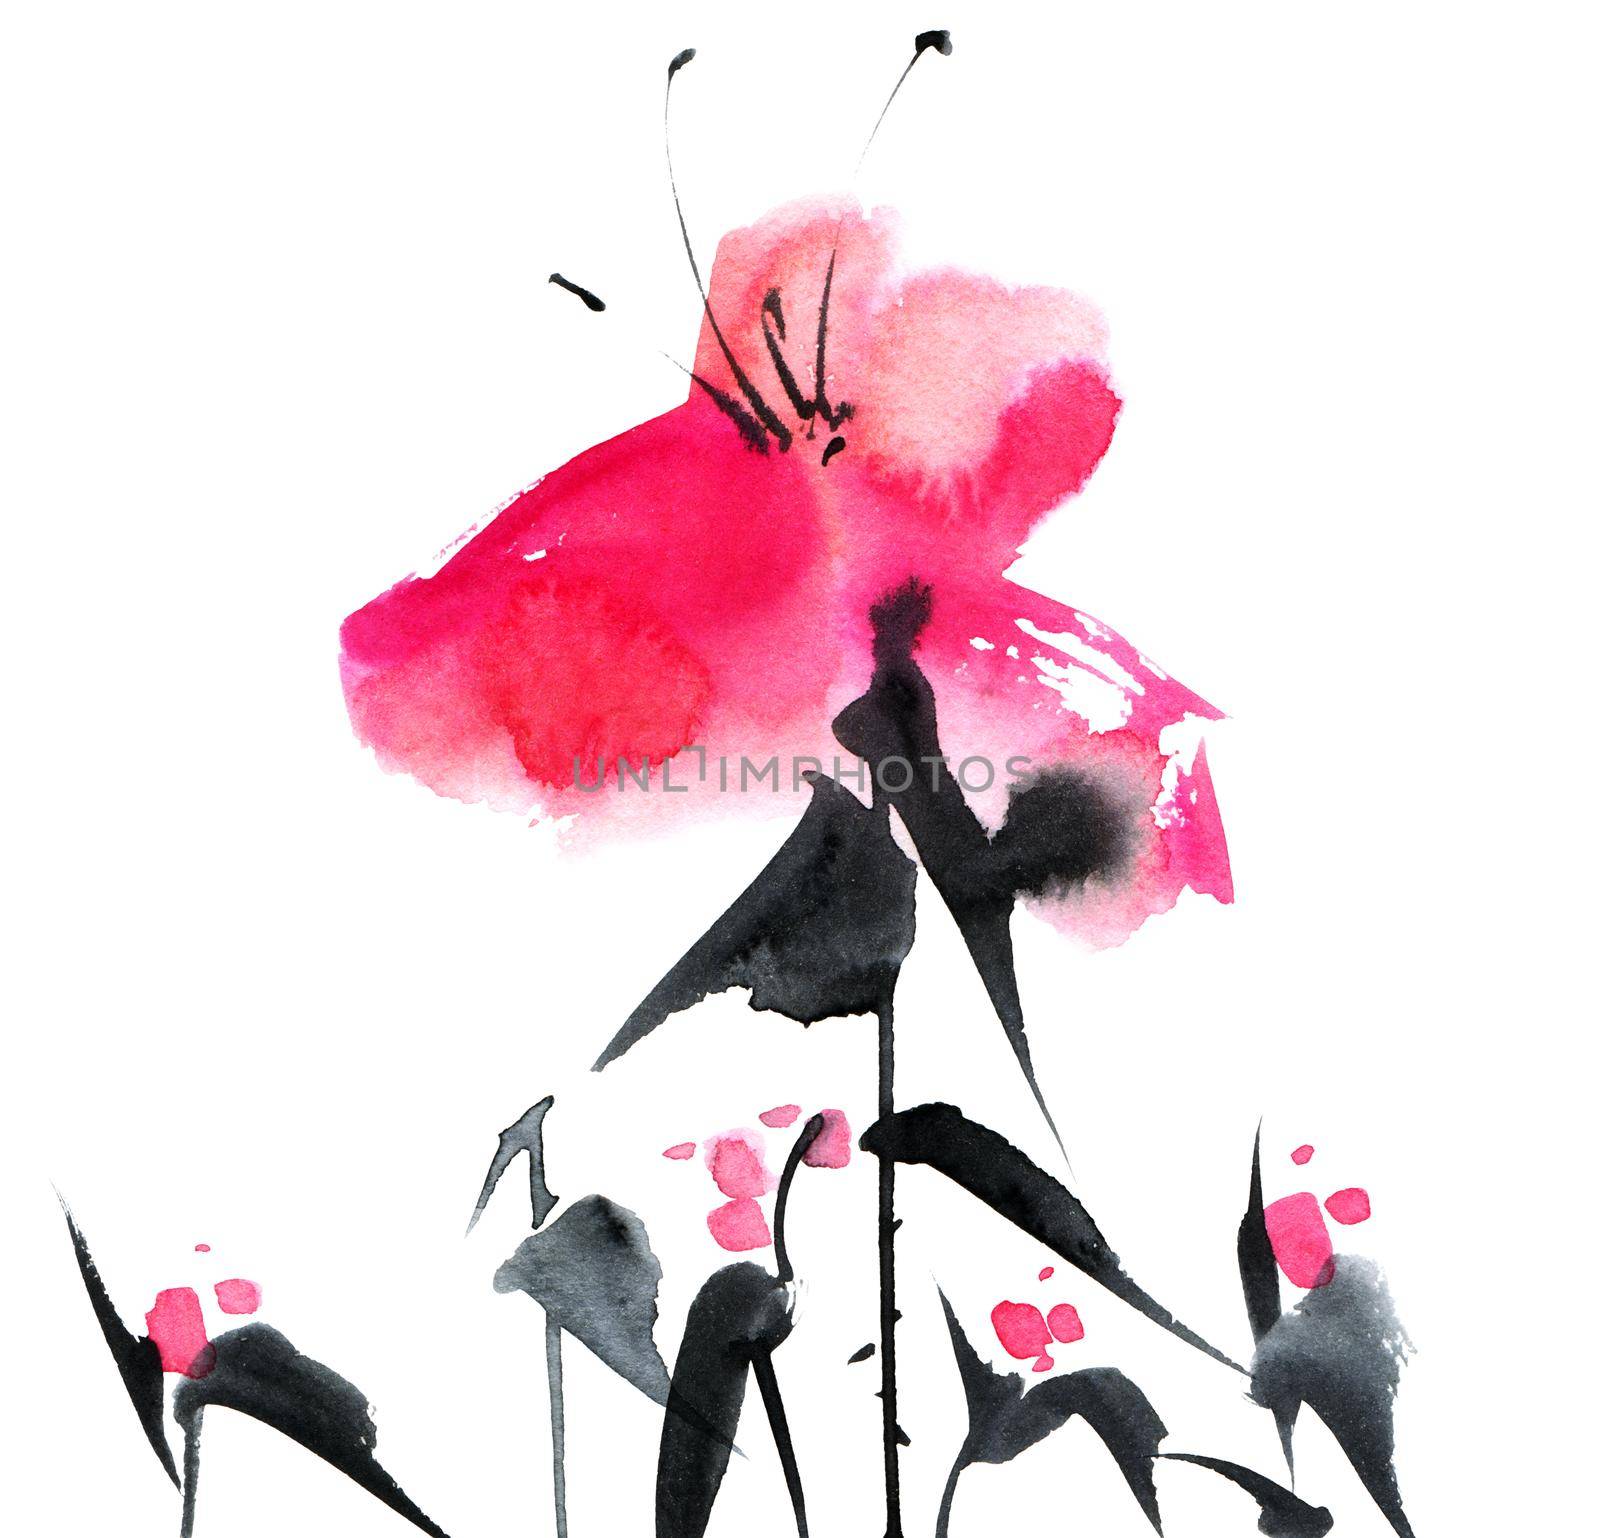 Watercolor and ink illustration of pink flowers on white background. Oriental traditional painting in style sumi-e, u-sin and gohua. Design element for greeting card, invitation or cover.